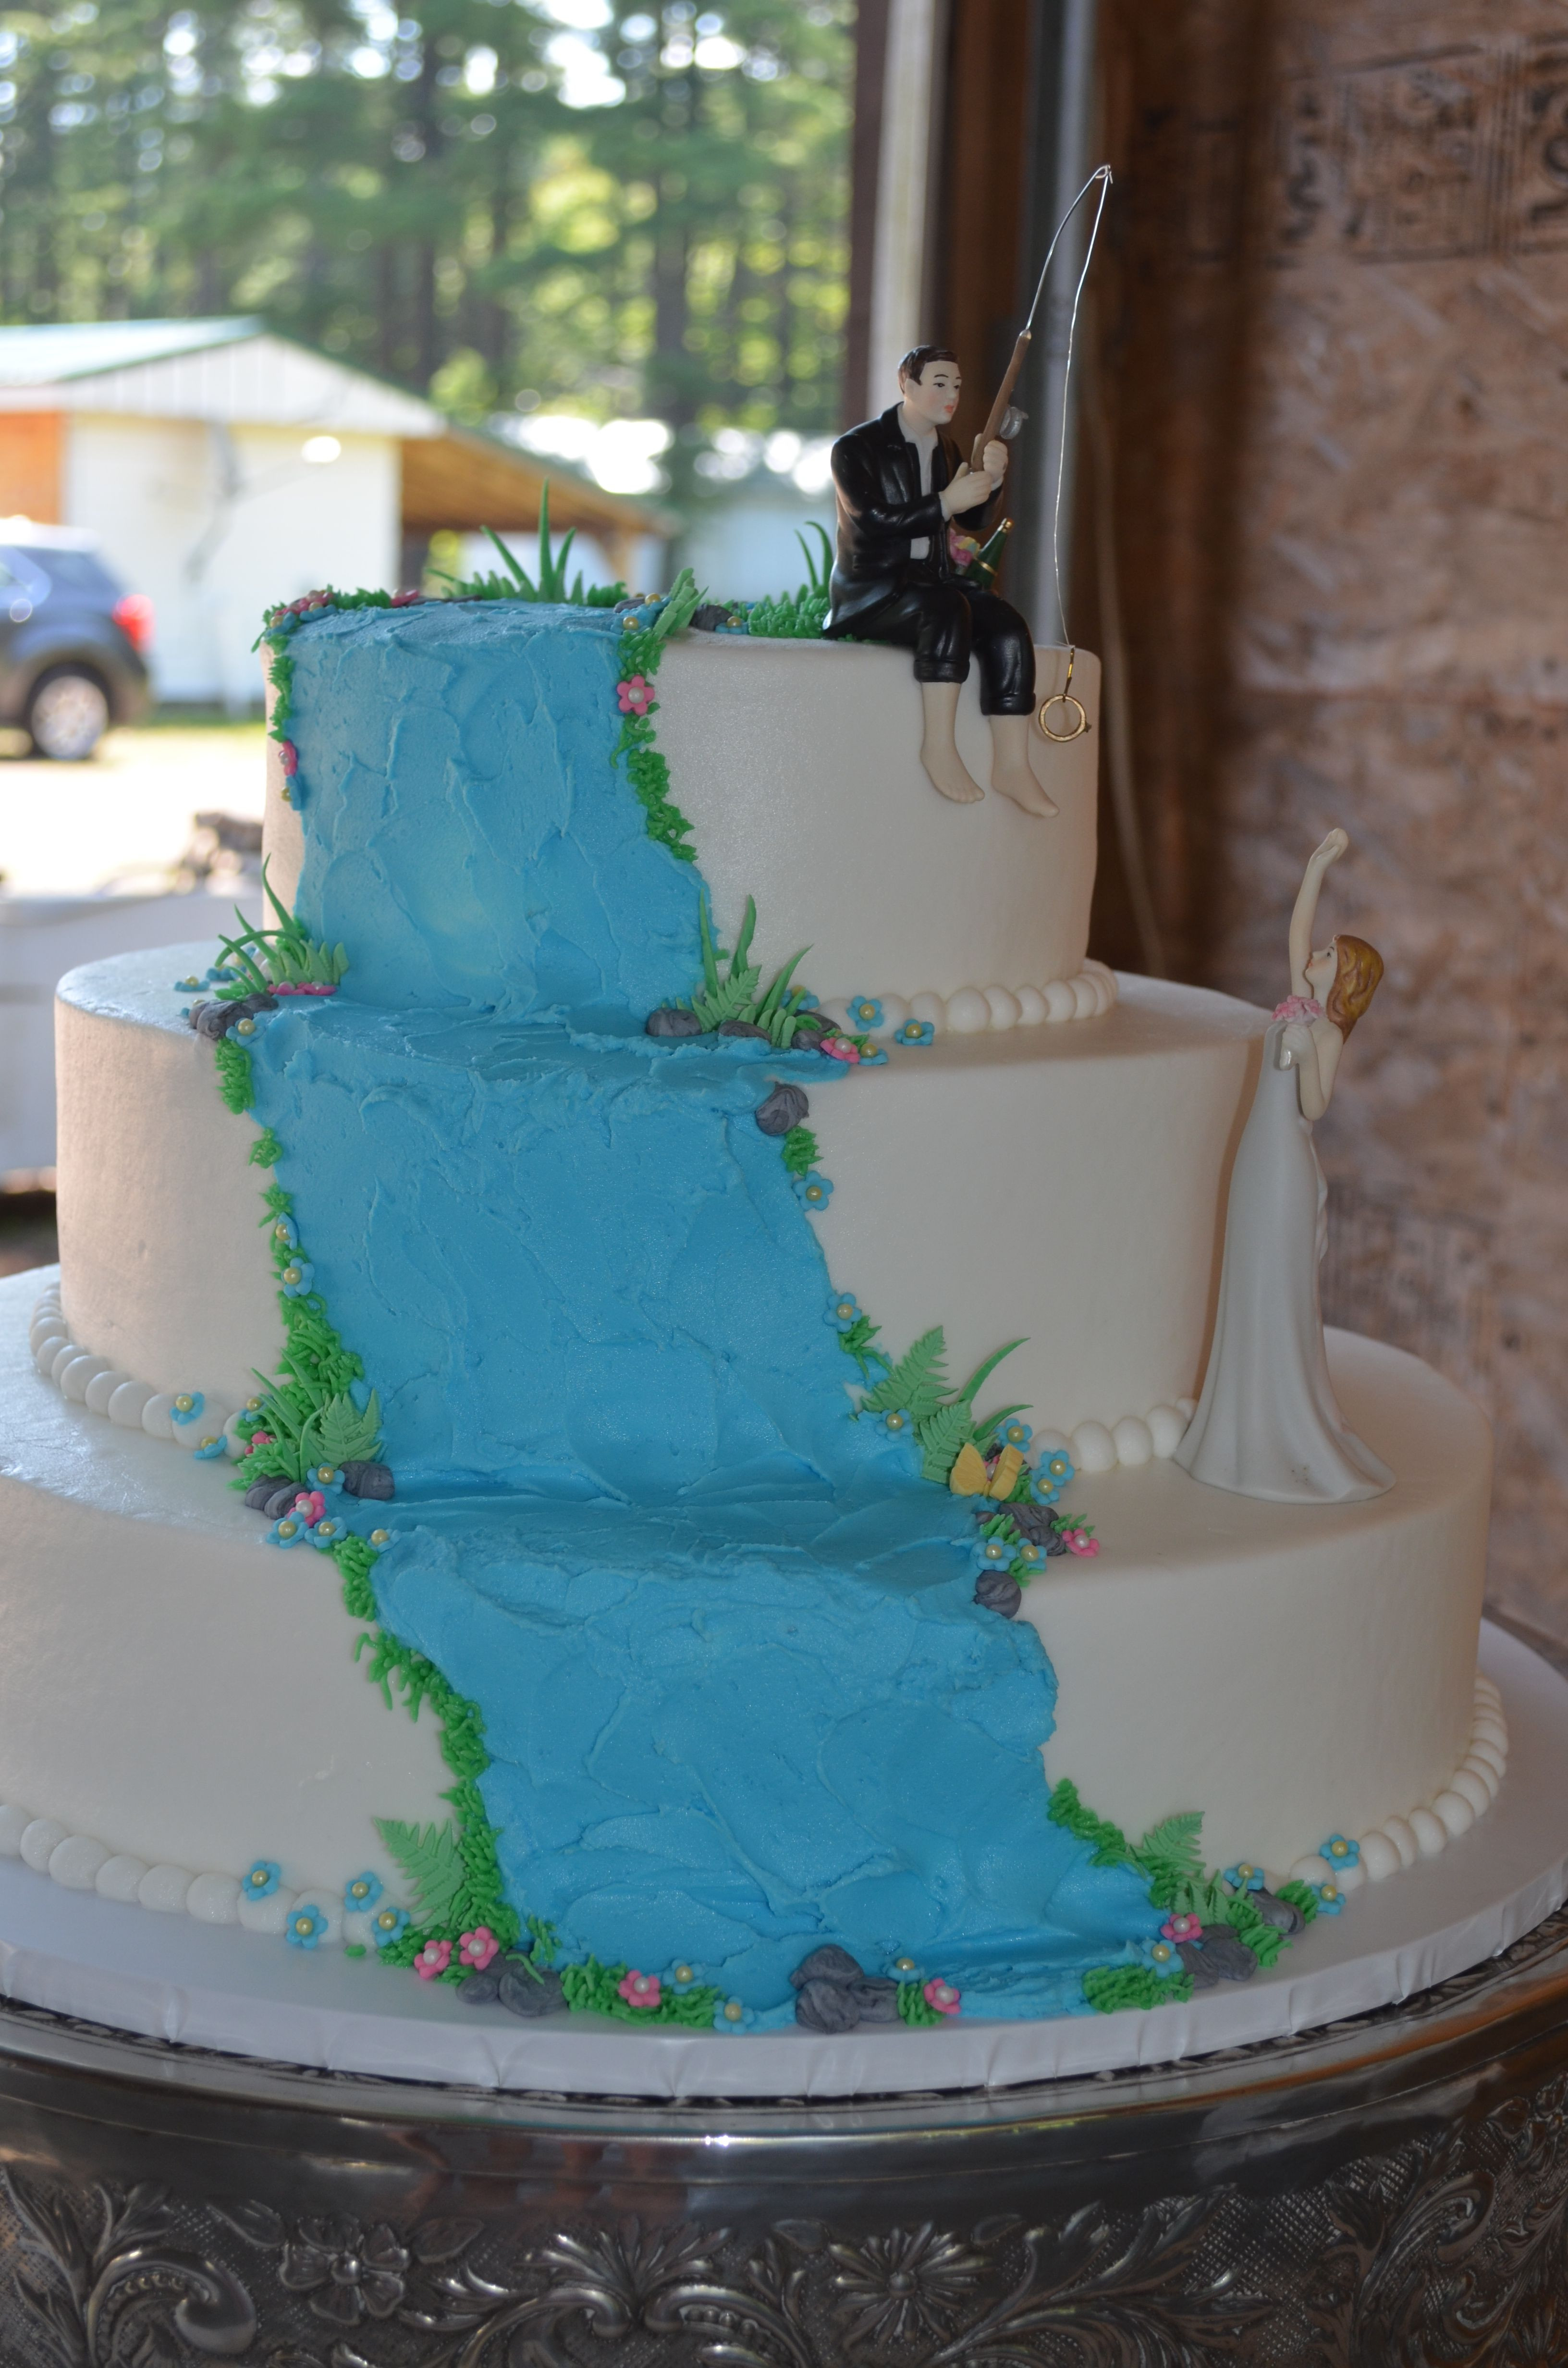 Wedding Cakes With Waterfalls
 Waterfall Wedding Cake Cake Ideas and Designs